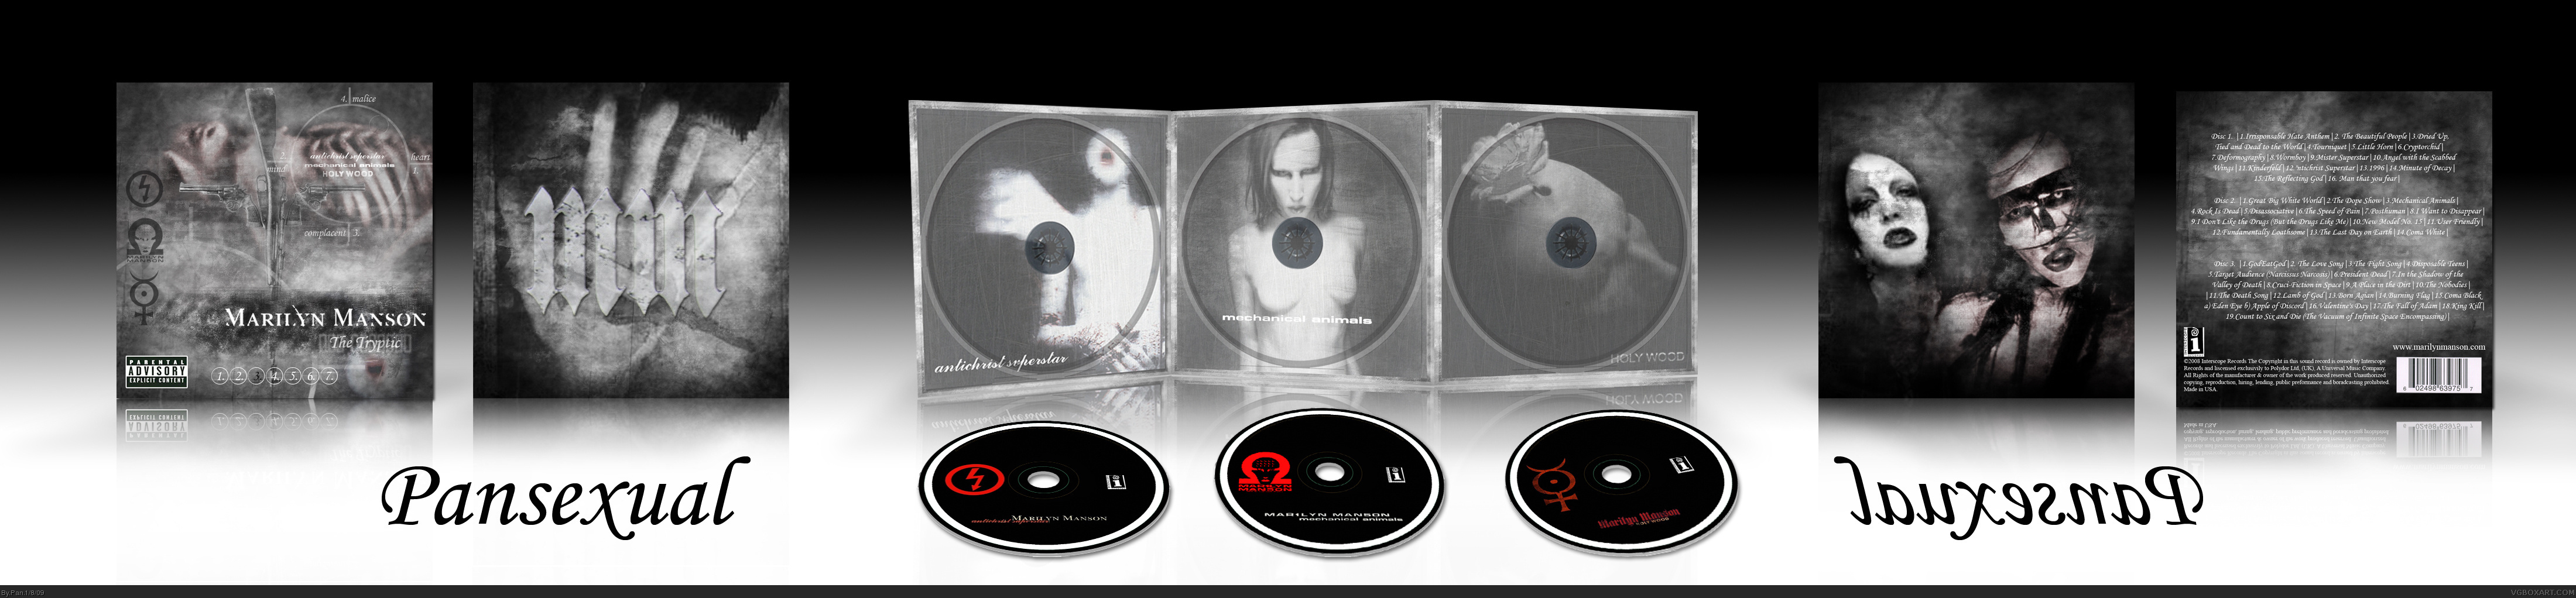 Marilyn Manson: The Tryptic box cover